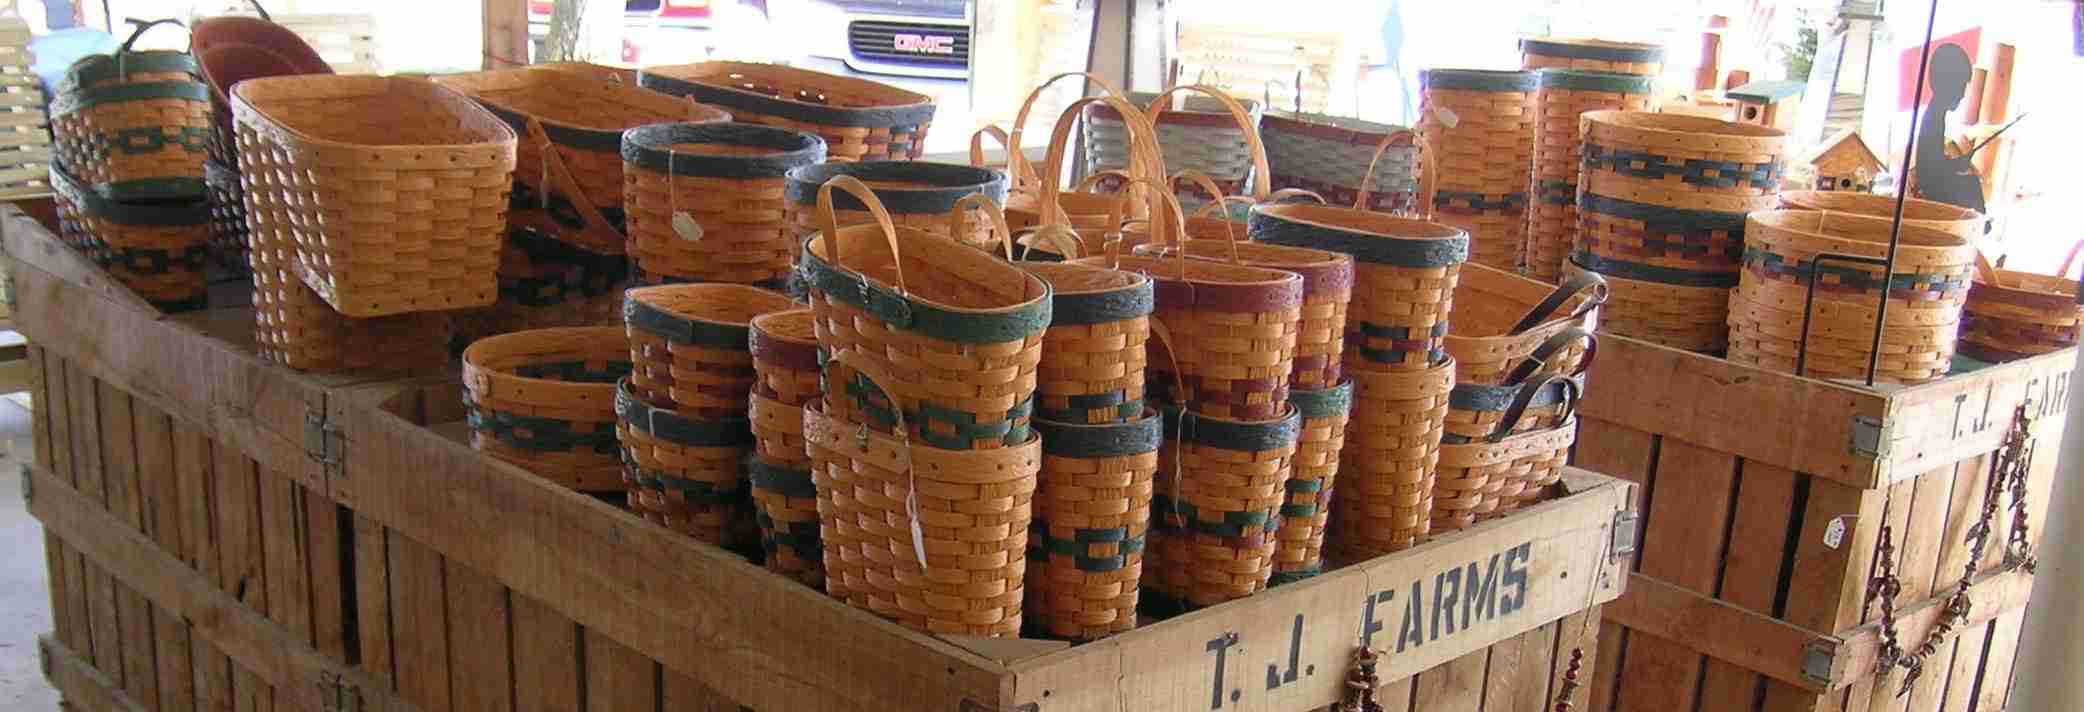 Various sizes and colors of baskets.